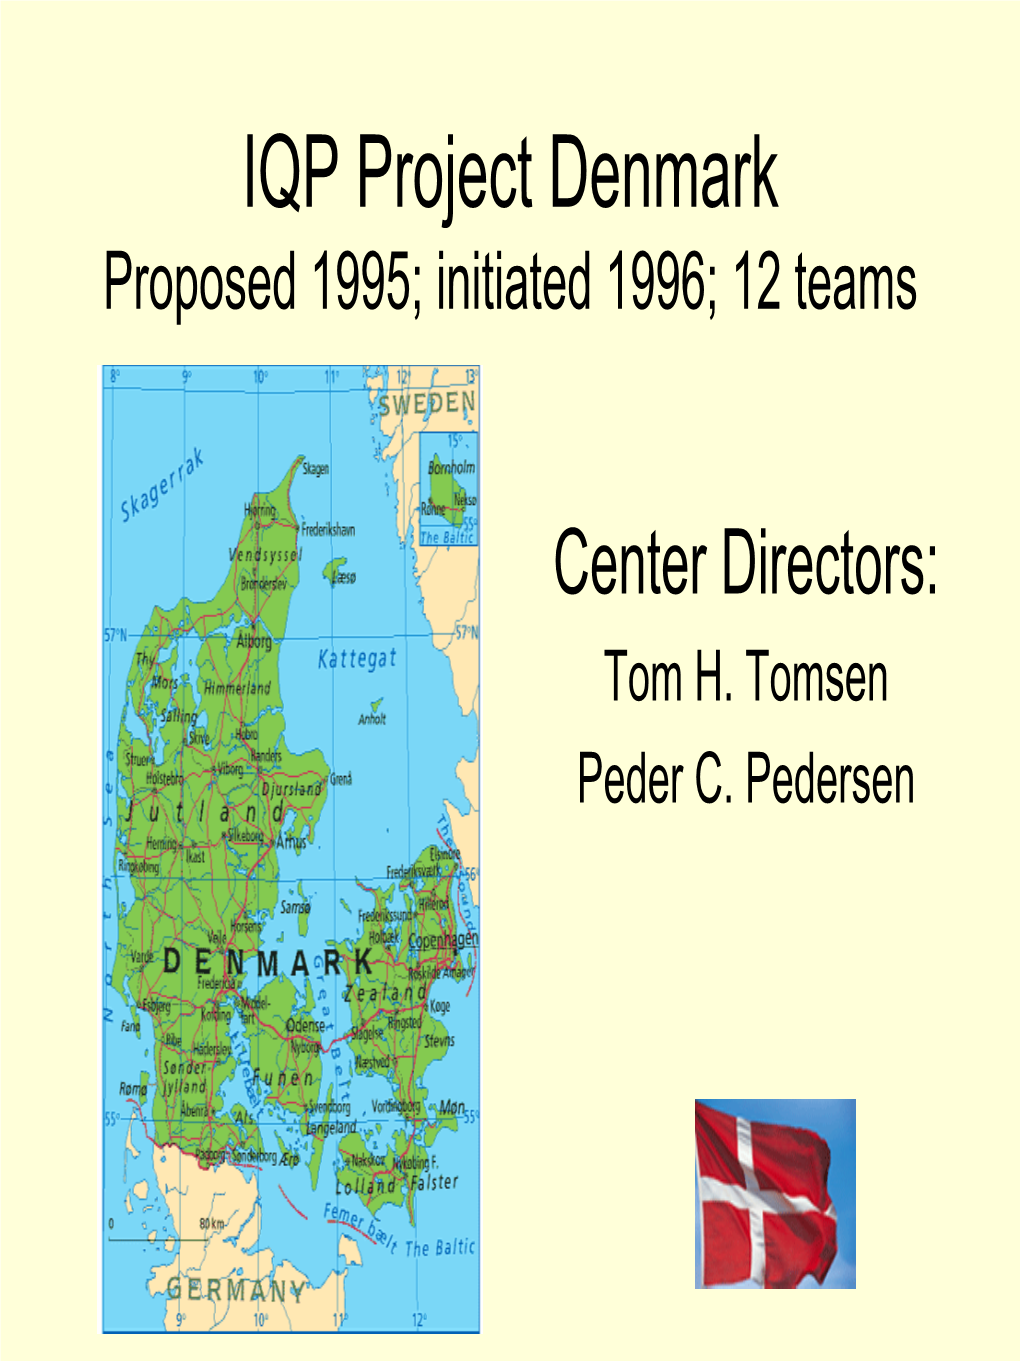 IQP Project Denmark Proposed 1995; Initiated 1996; 12 Teams